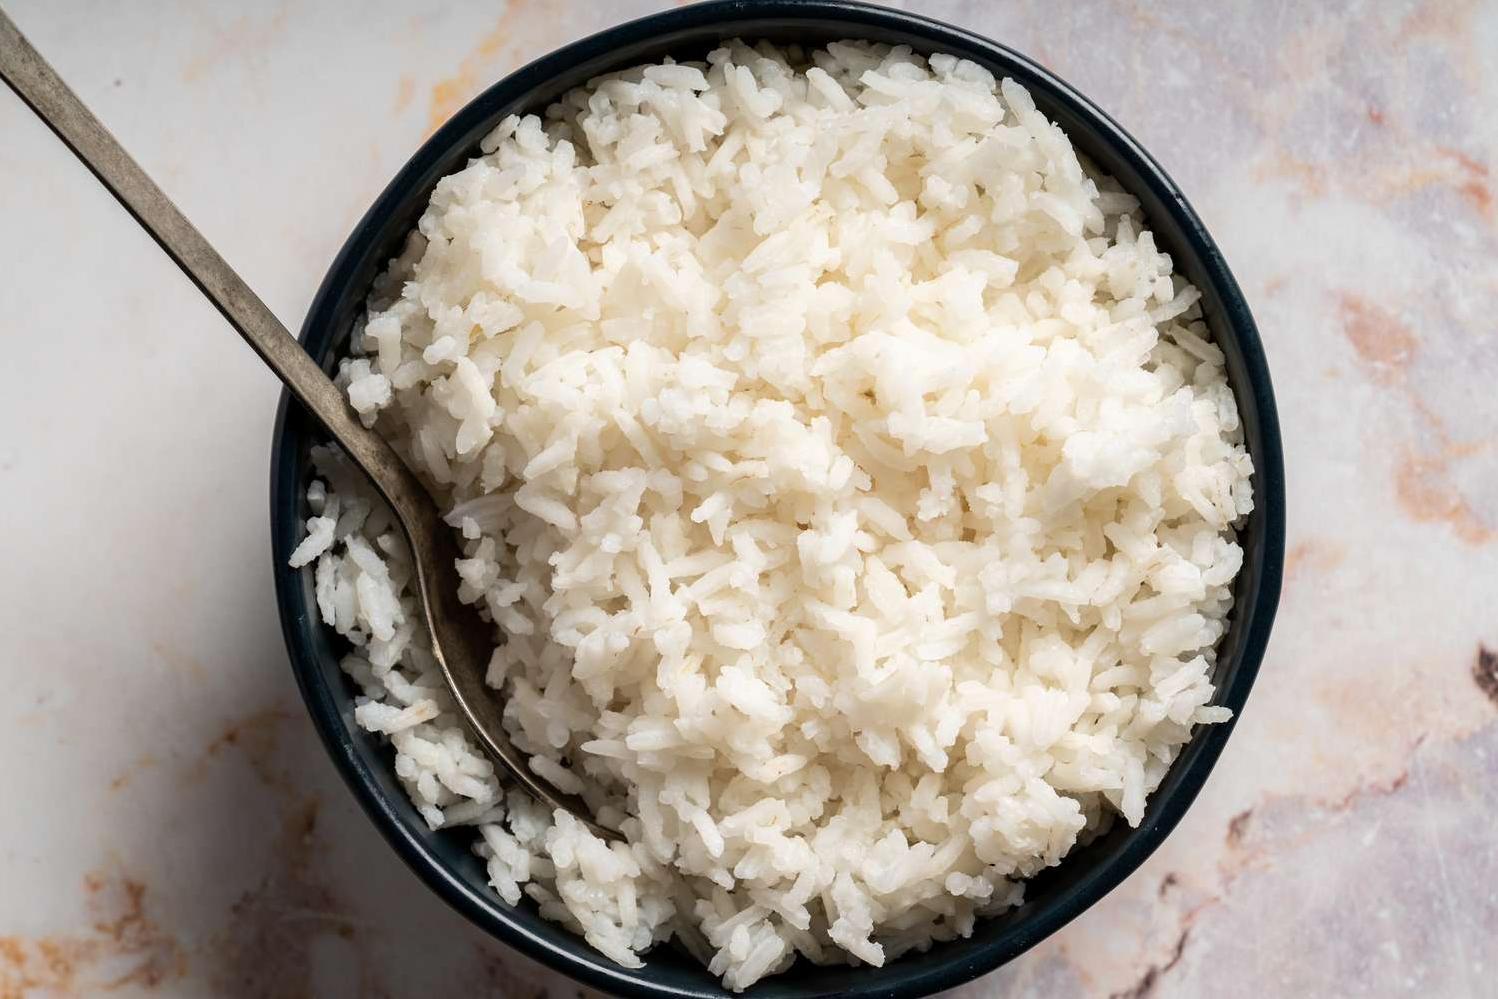  A steamy pot of Arroz Blanco, the perfect side dish for any meal.